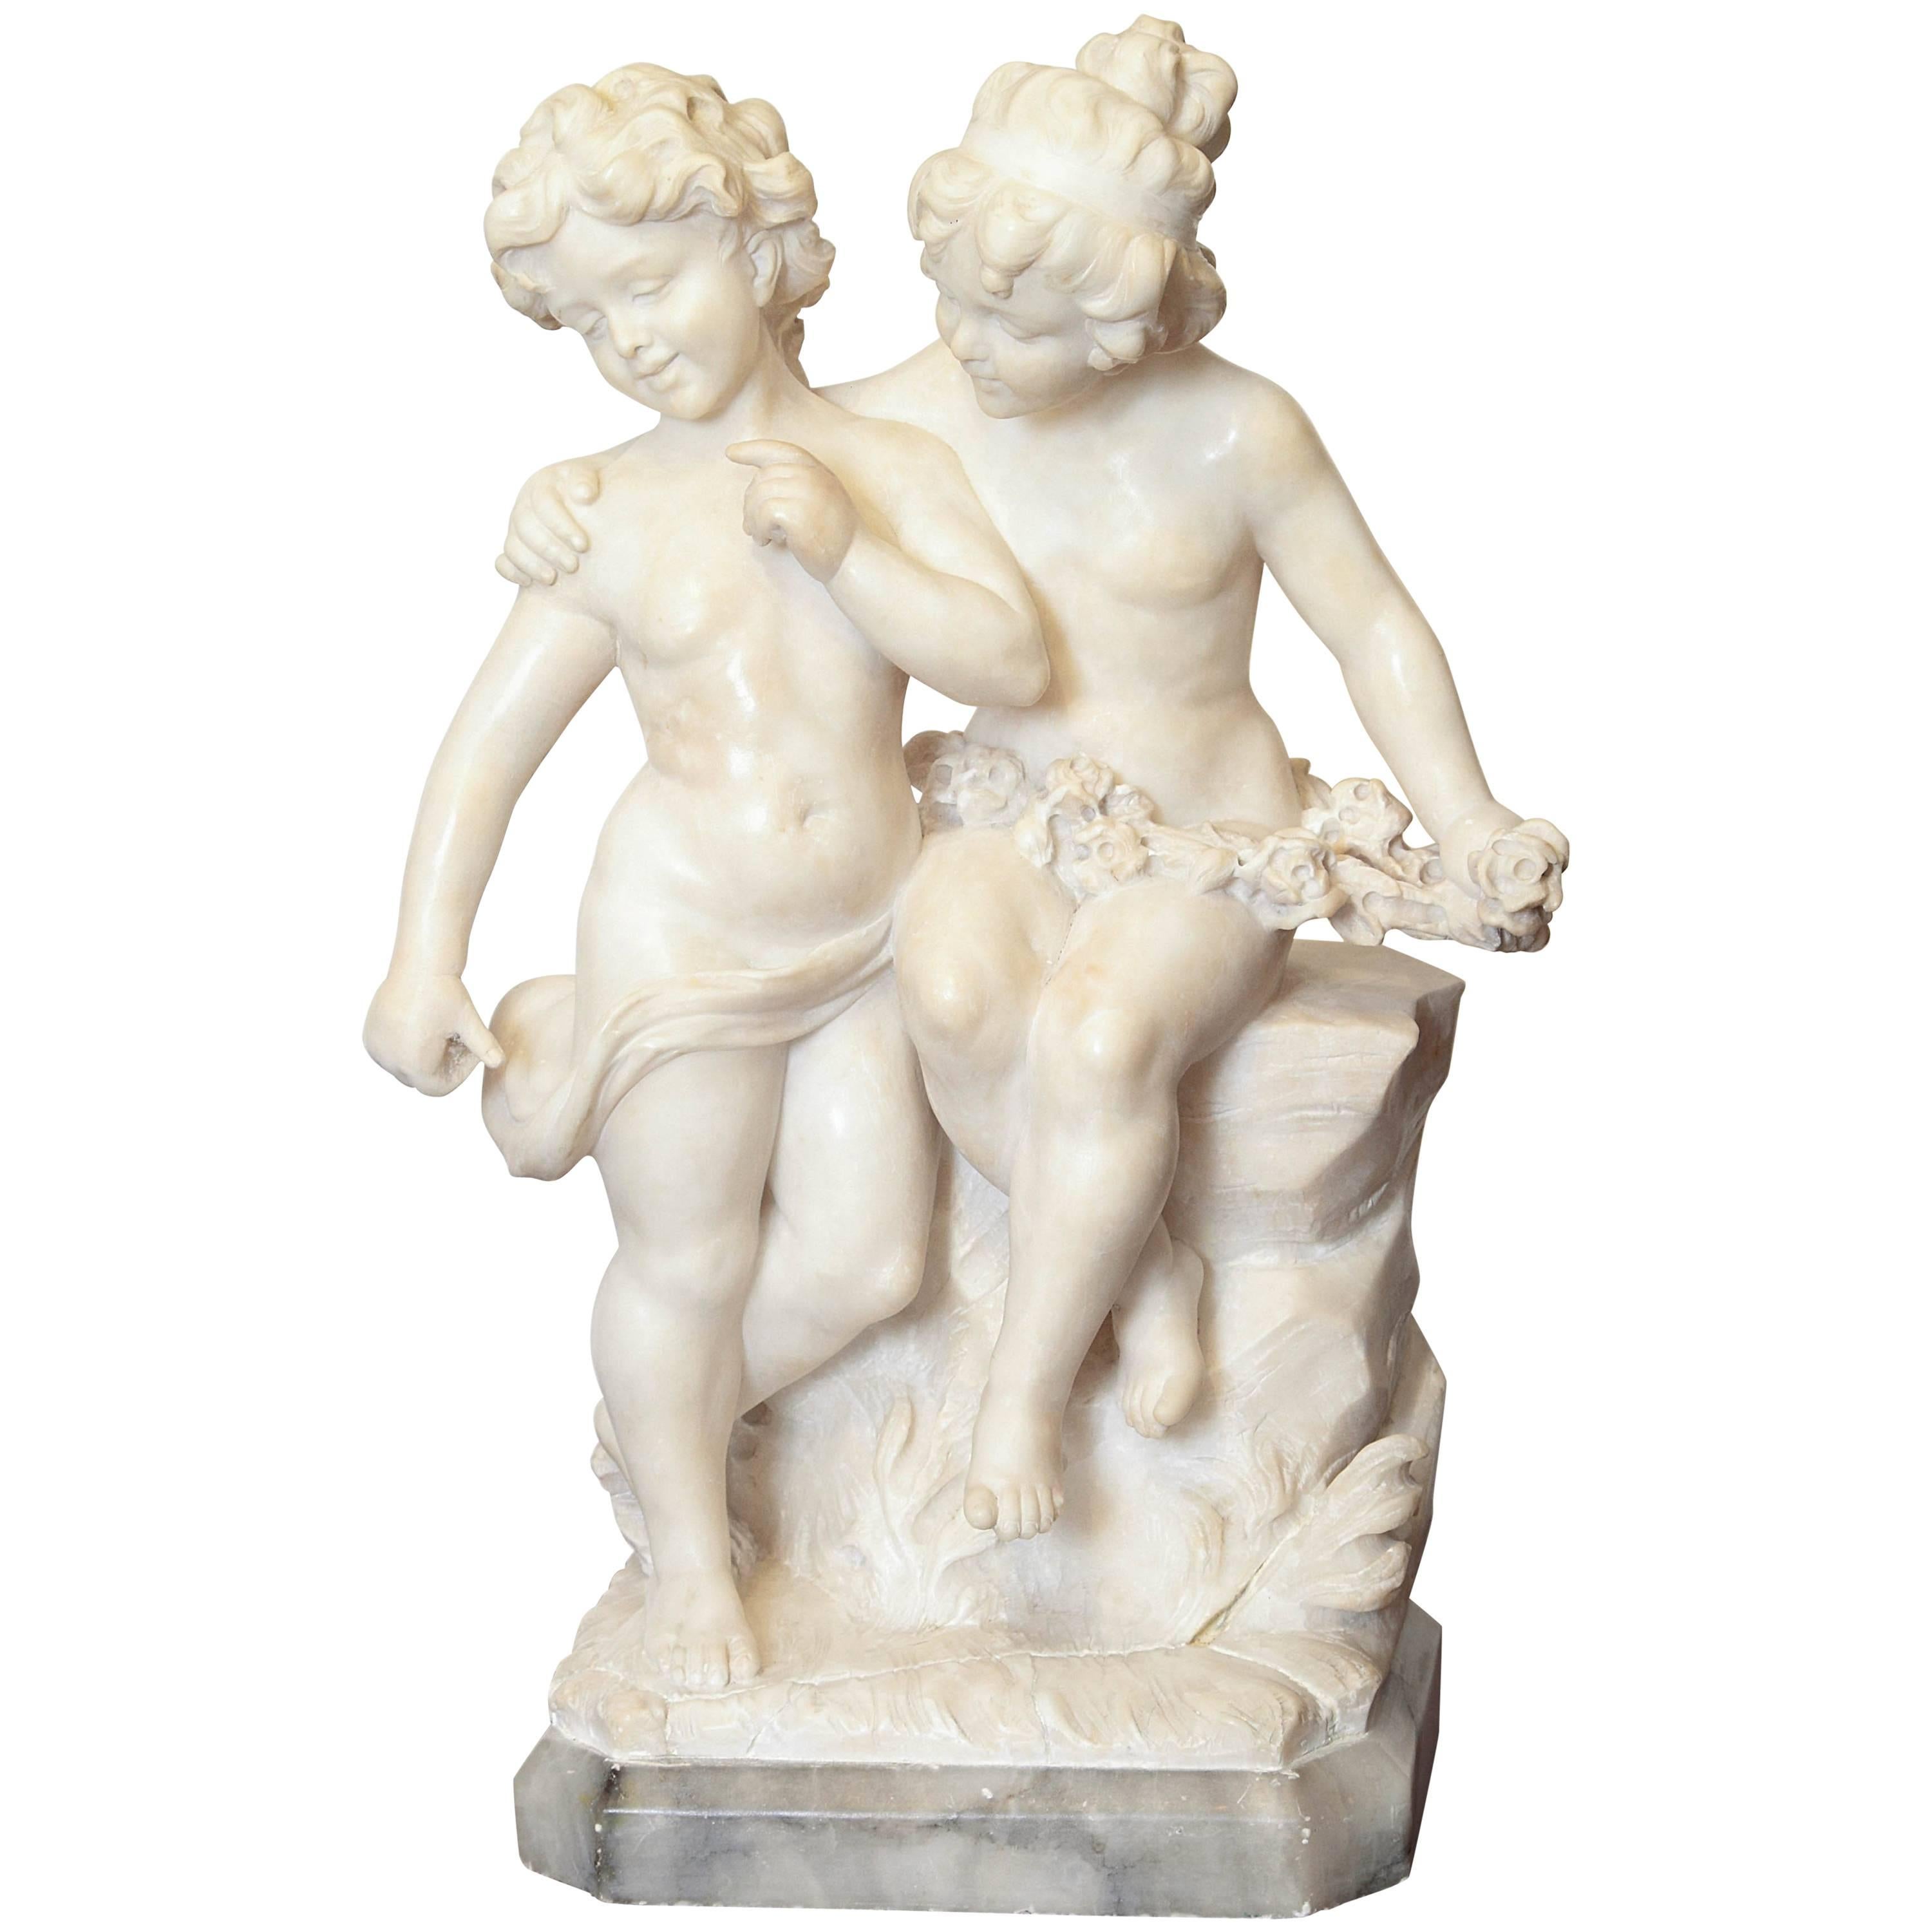 19th Century Italian Marble Sculpture of Two Children Sitting on a Wall